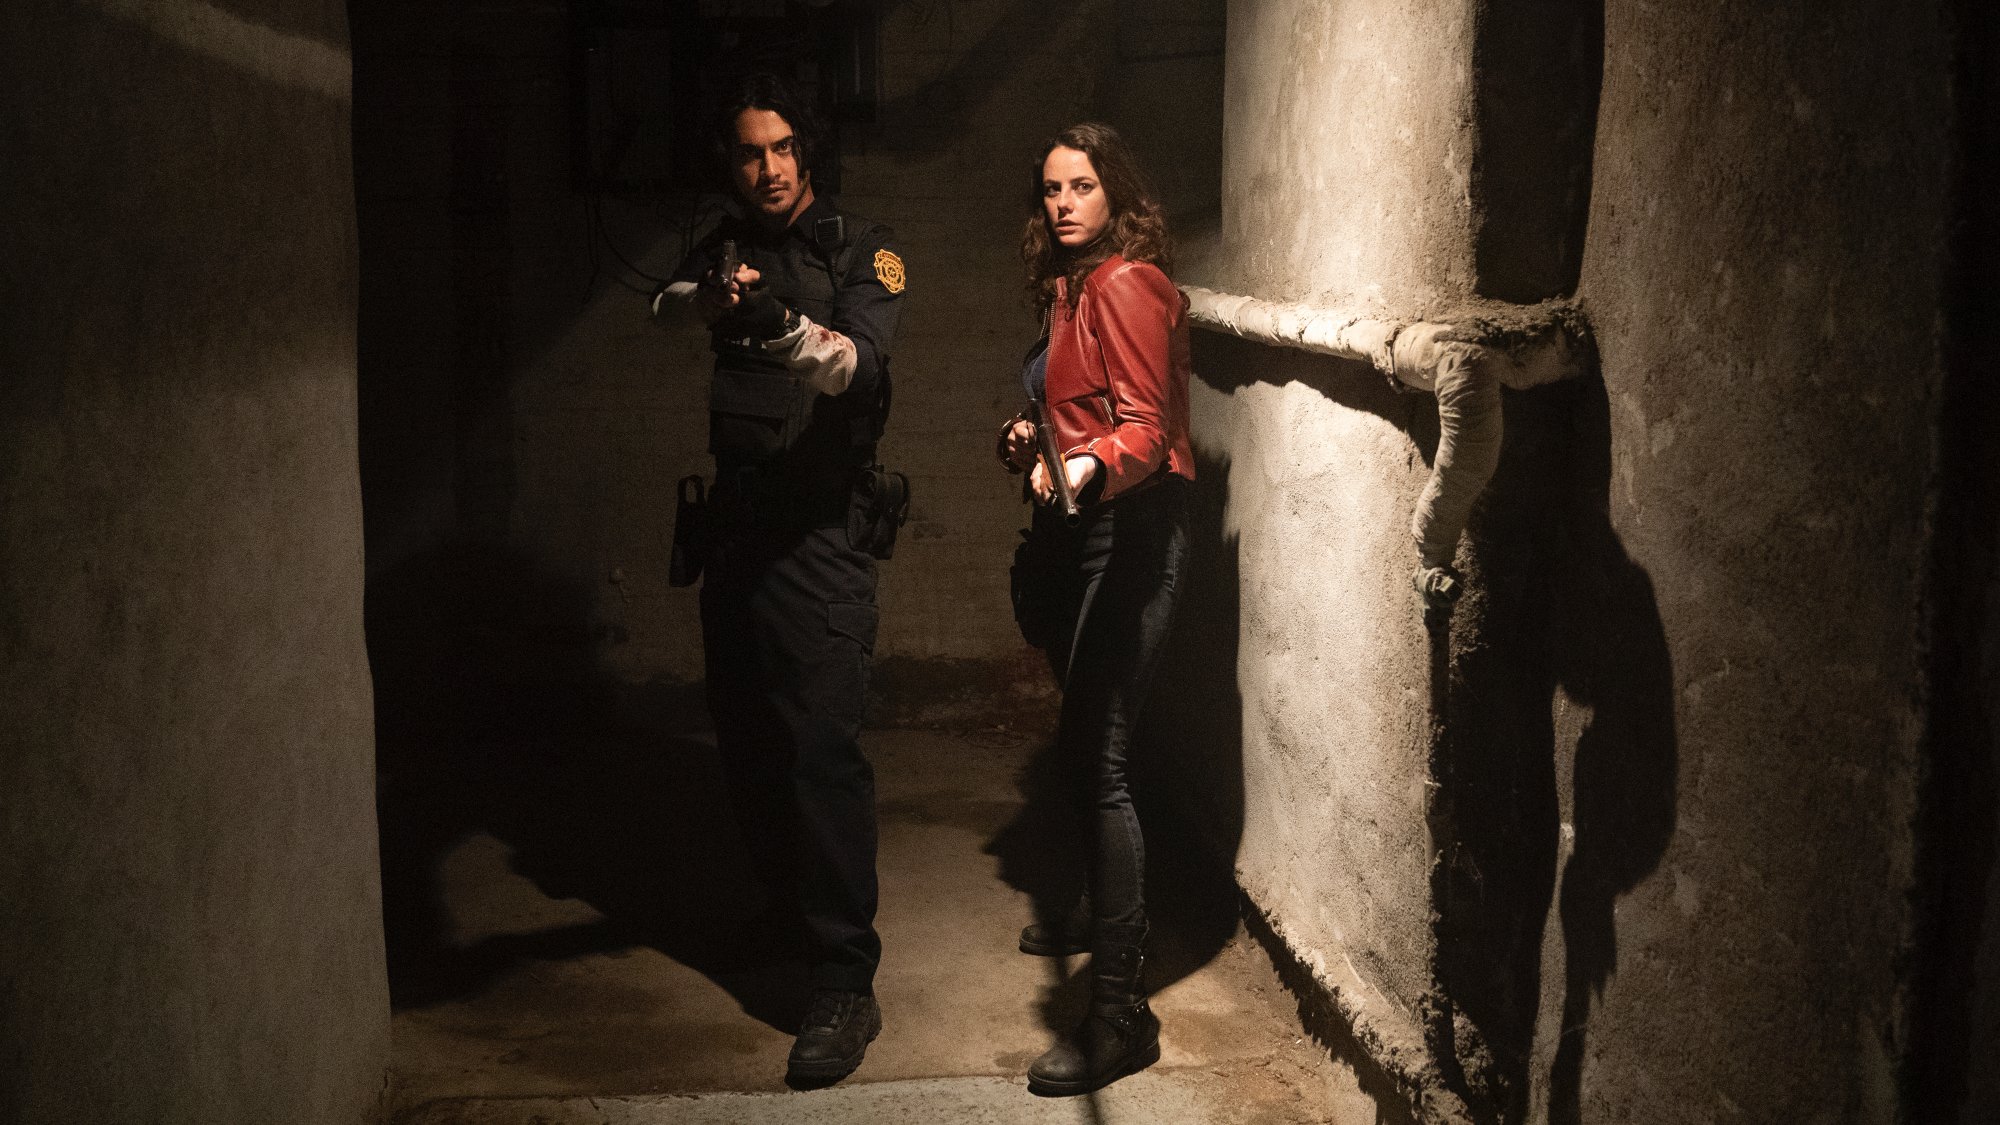 'Resident Evil Welcome to Raccoon City' actors Avan Jogia as Leon Kennedy and Kaya Scodelario as Claire Redfield with guns in a dark hallway